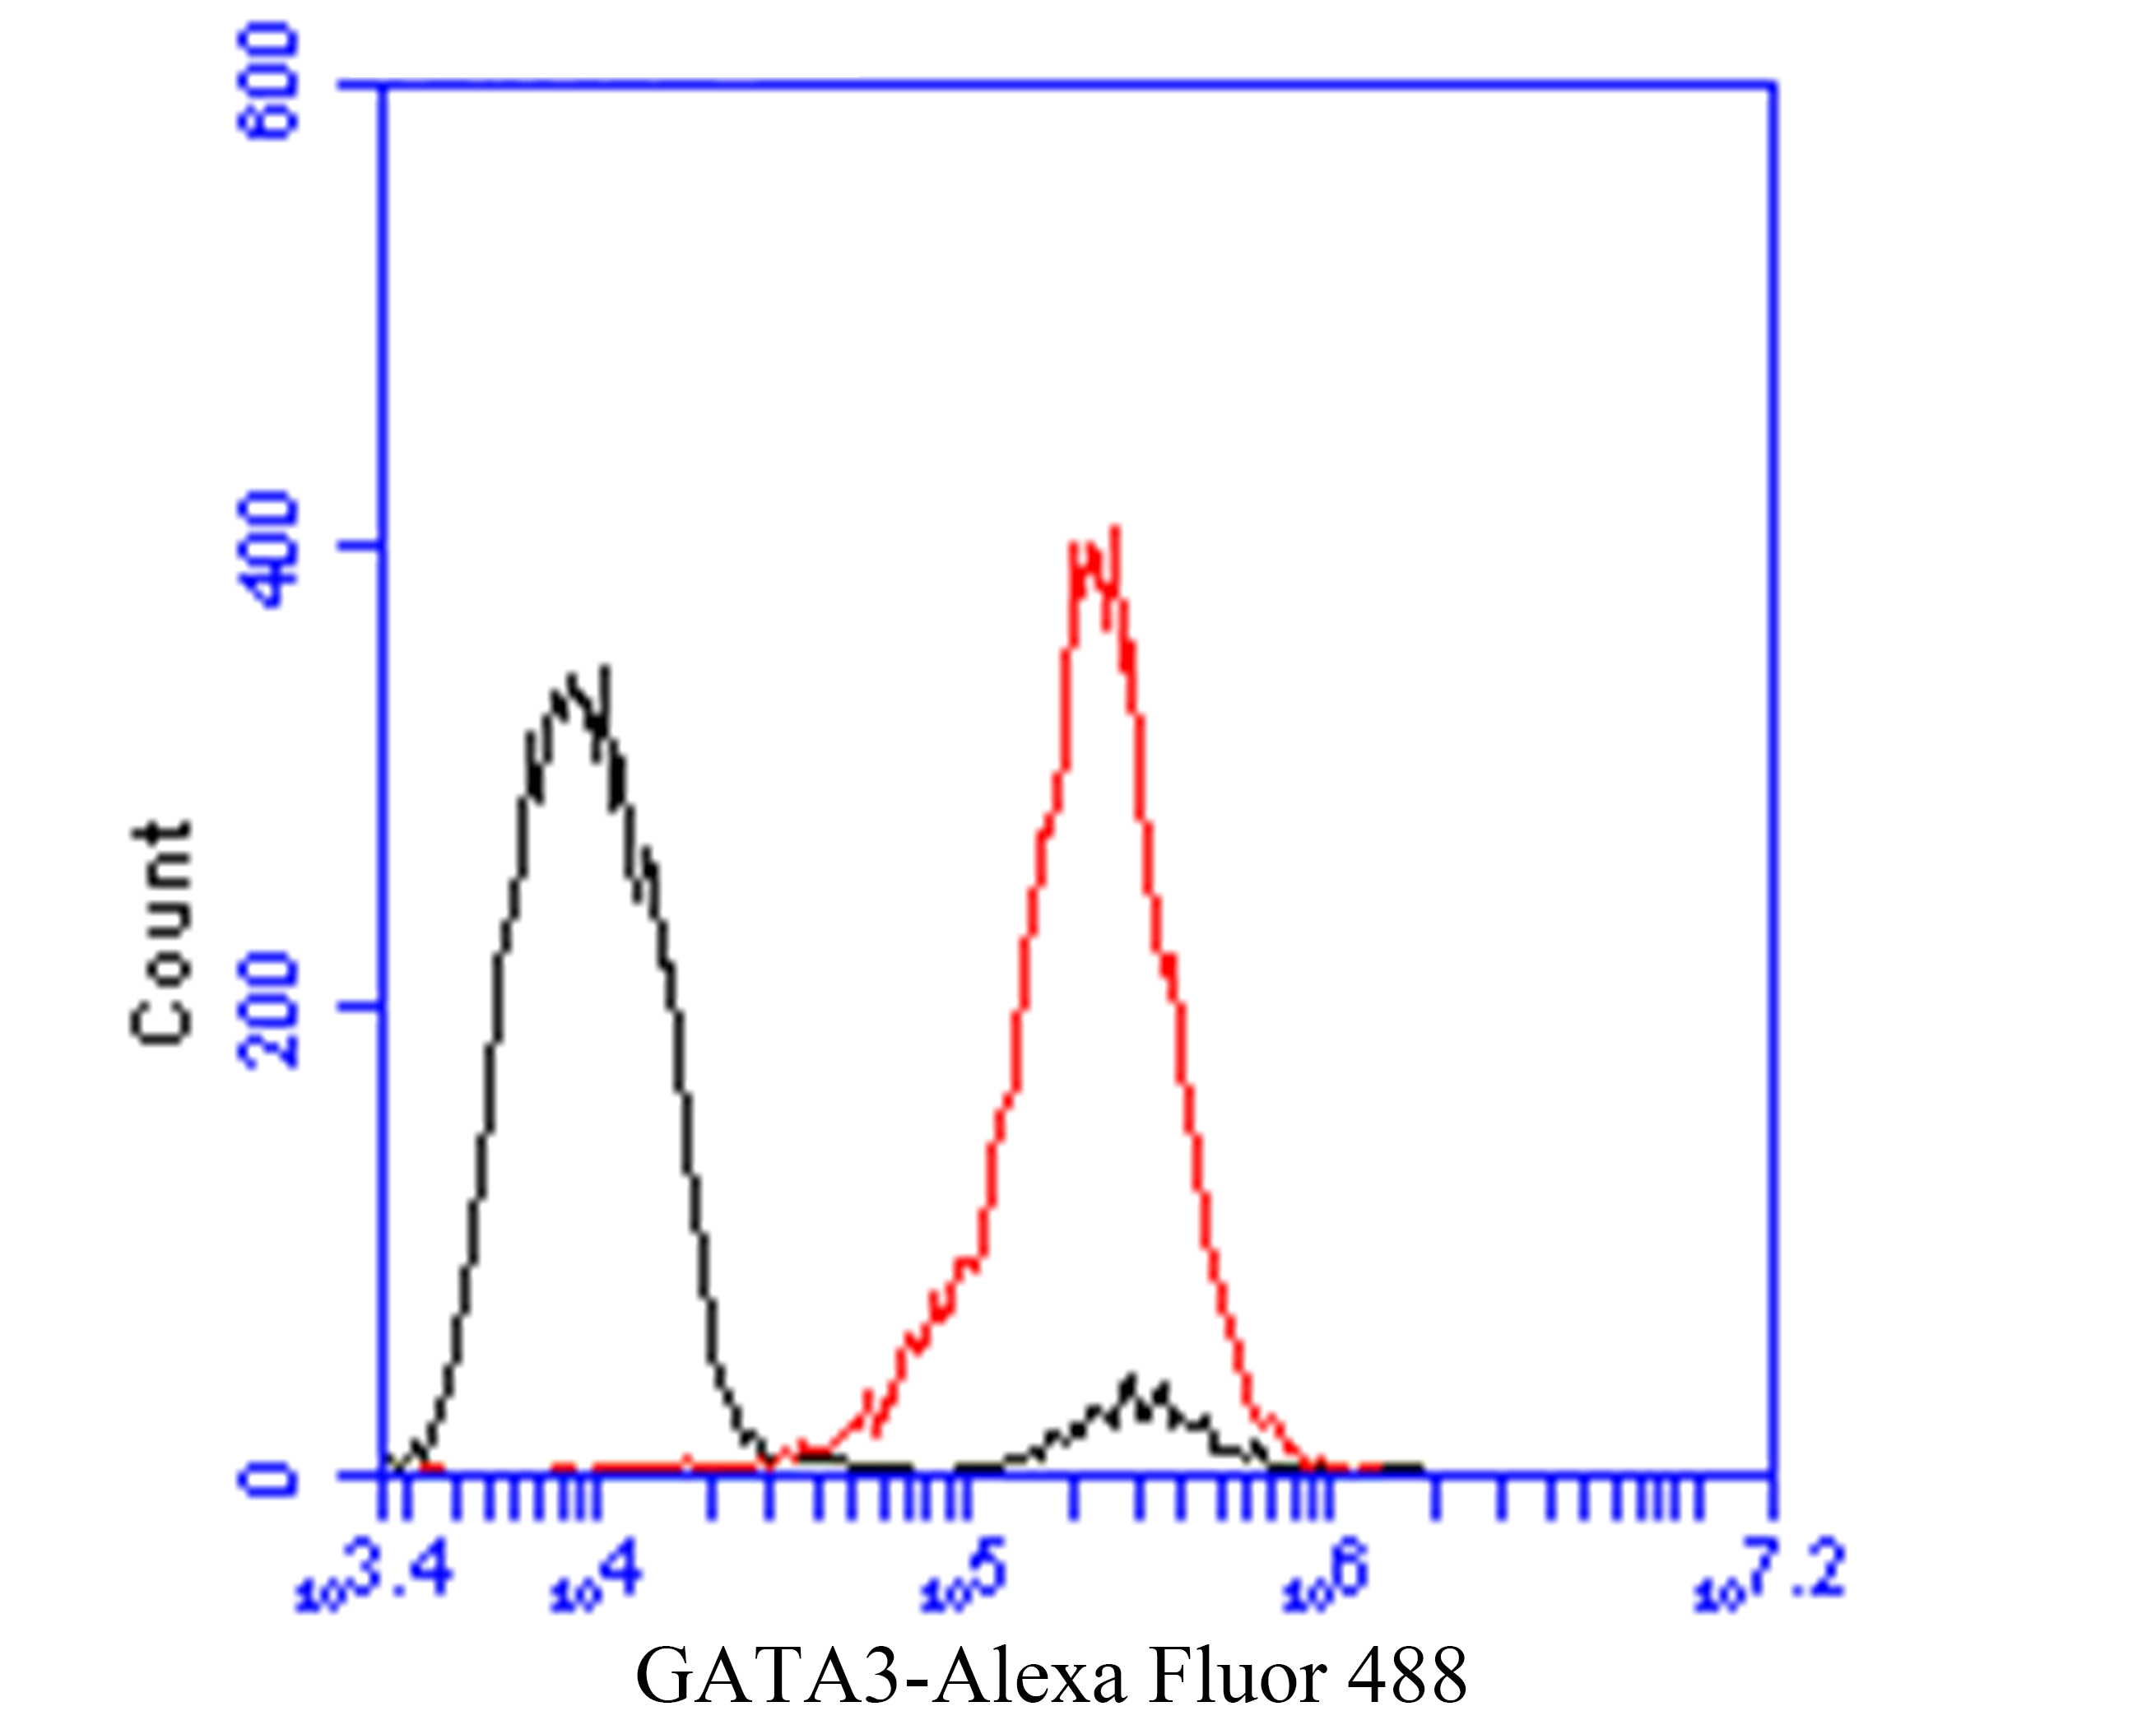 Flow cytometric analysis of GATA3 was done on MCF-7 cells. The cells were fixed, permeabilized and stained with the primary antibody (ER1901-20, 1/50) (red). After incubation of the primary antibody at room temperature for an hour, the cells were stained with a Alexa Fluor 488-conjugated Goat anti-Rabbit IgG Secondary antibody at 1/1000 dilution for 30 minutes.Unlabelled sample was used as a control (cells without incubation with primary antibody; black).